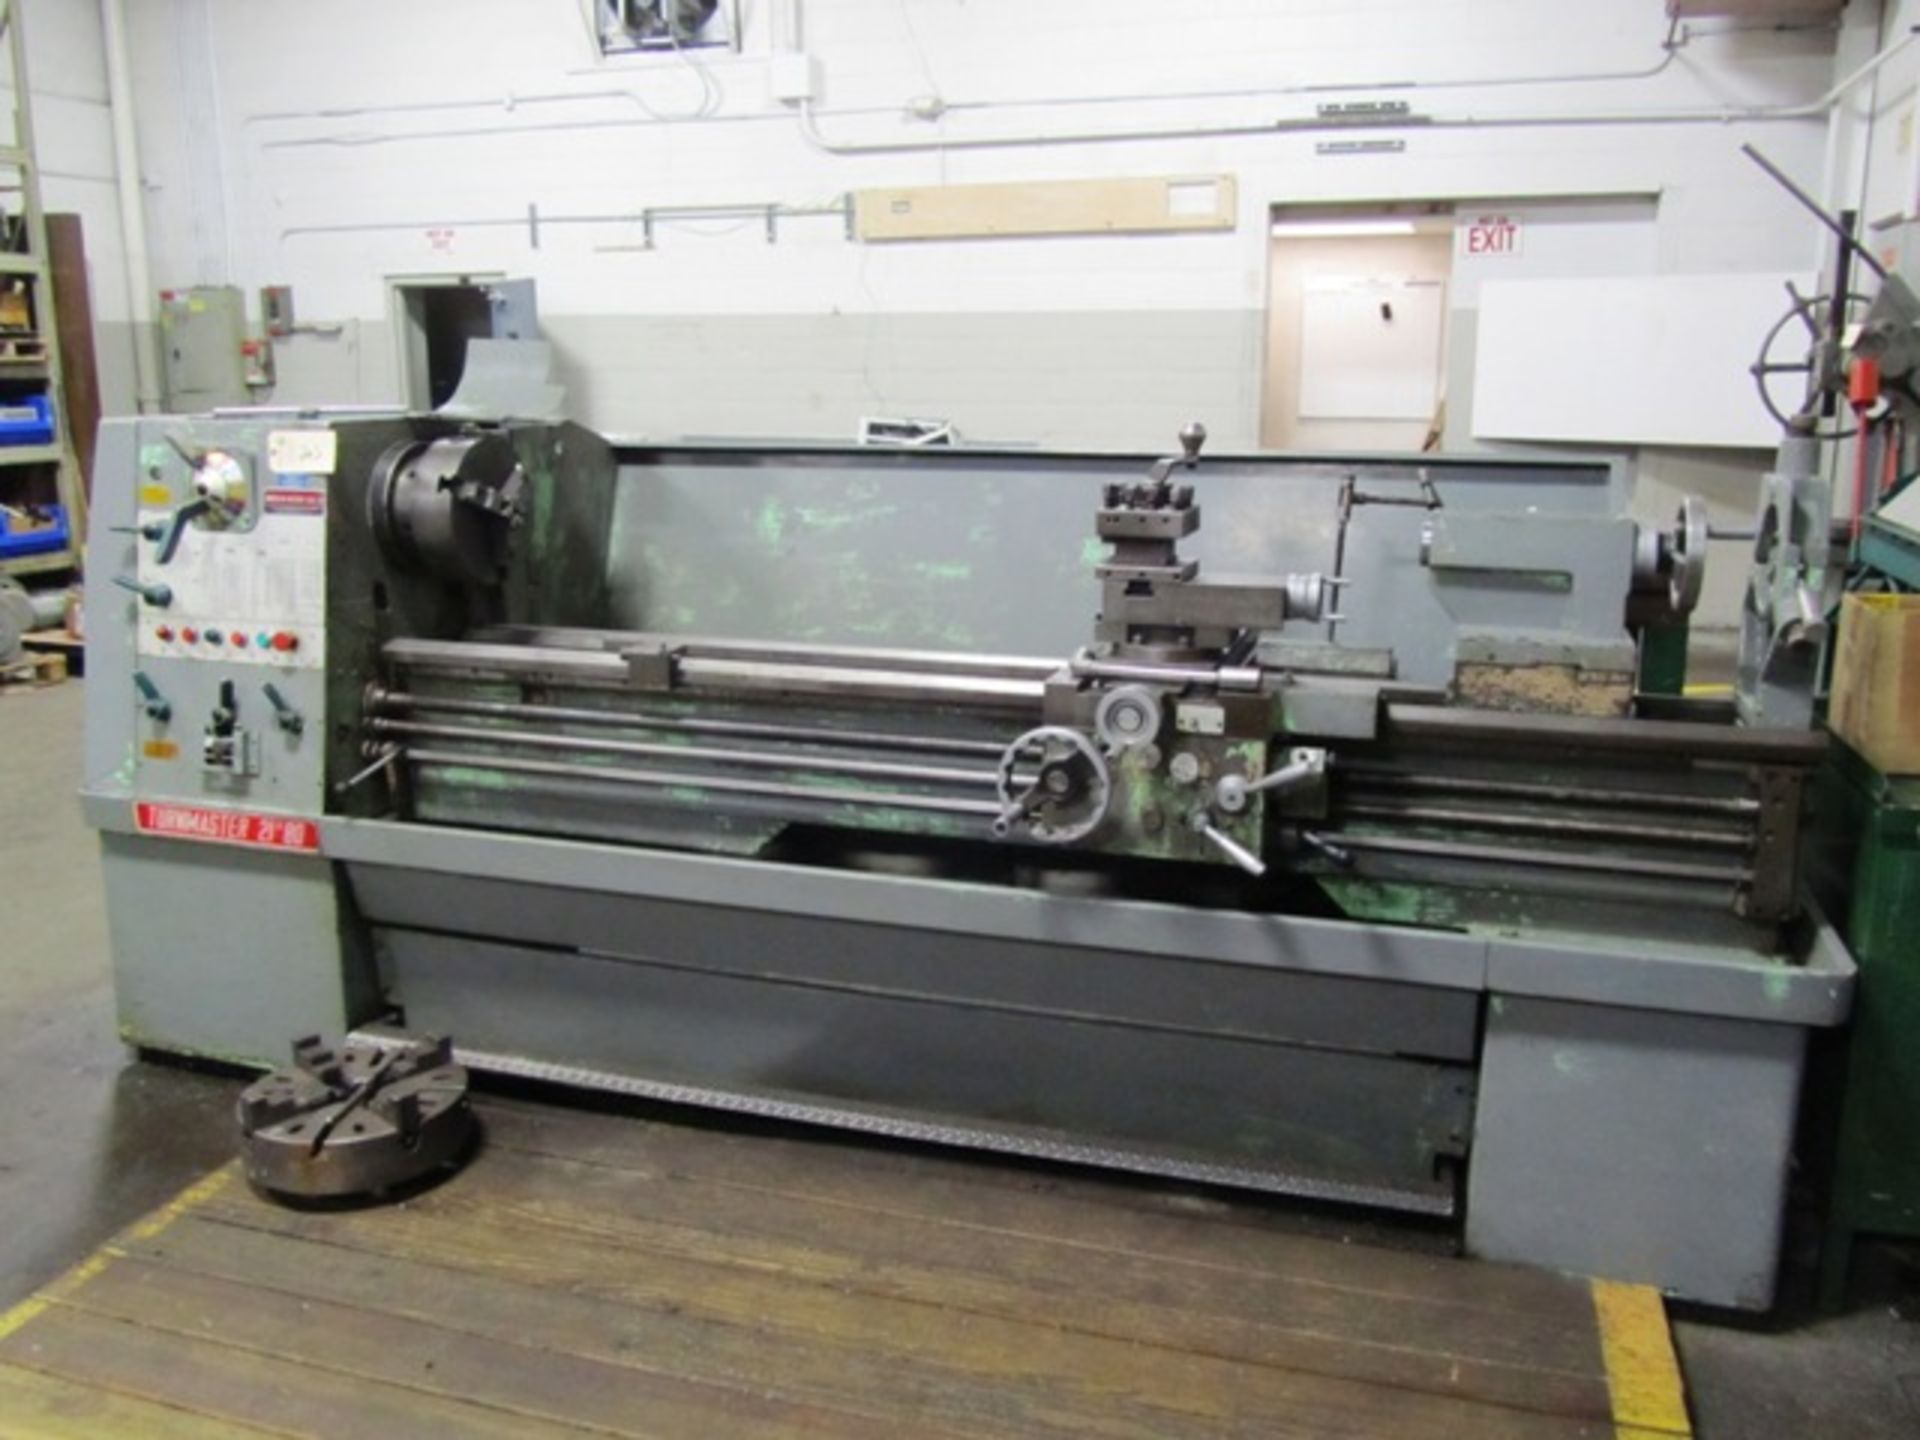 Turnmaster 21'' x 80'' Gap Bed Engine Lathe with 4-Jaw Chuck, Tail Stock, Taper Attachment, Inch & - Image 2 of 2